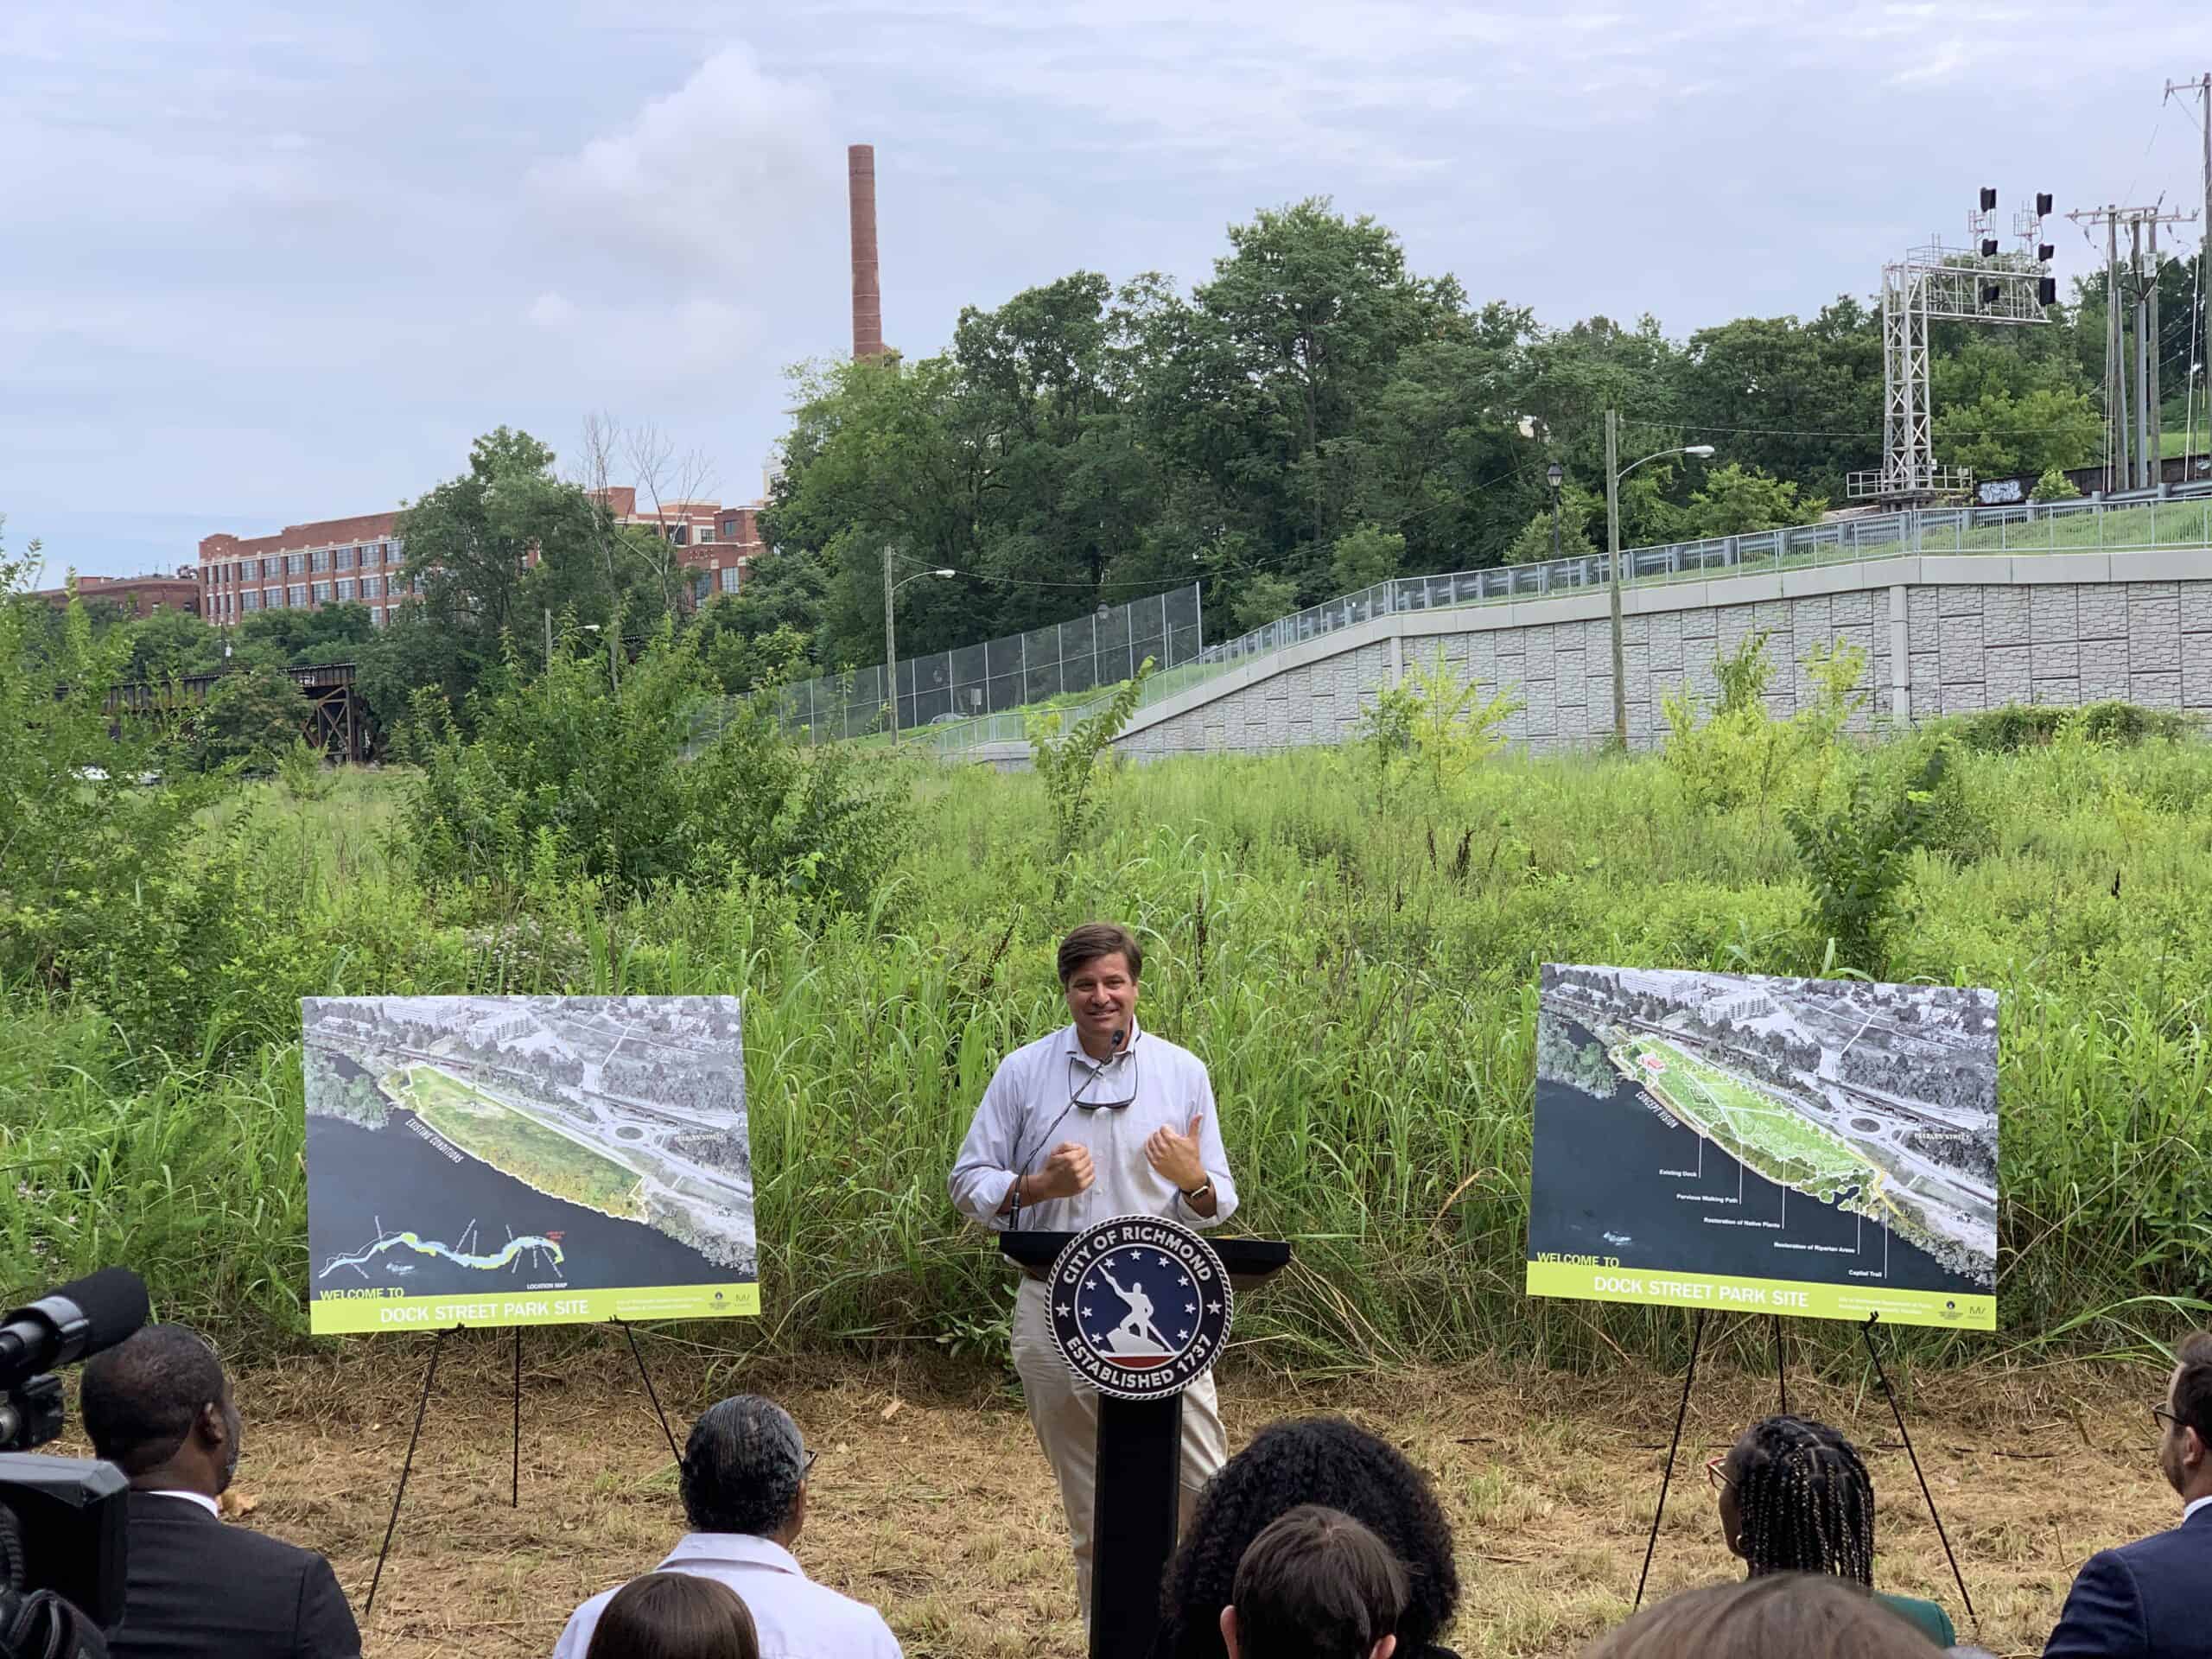 Dock Street press conference with remarks from CRLC executive director Parker Agelasto. The View That Named Richmond Protected.